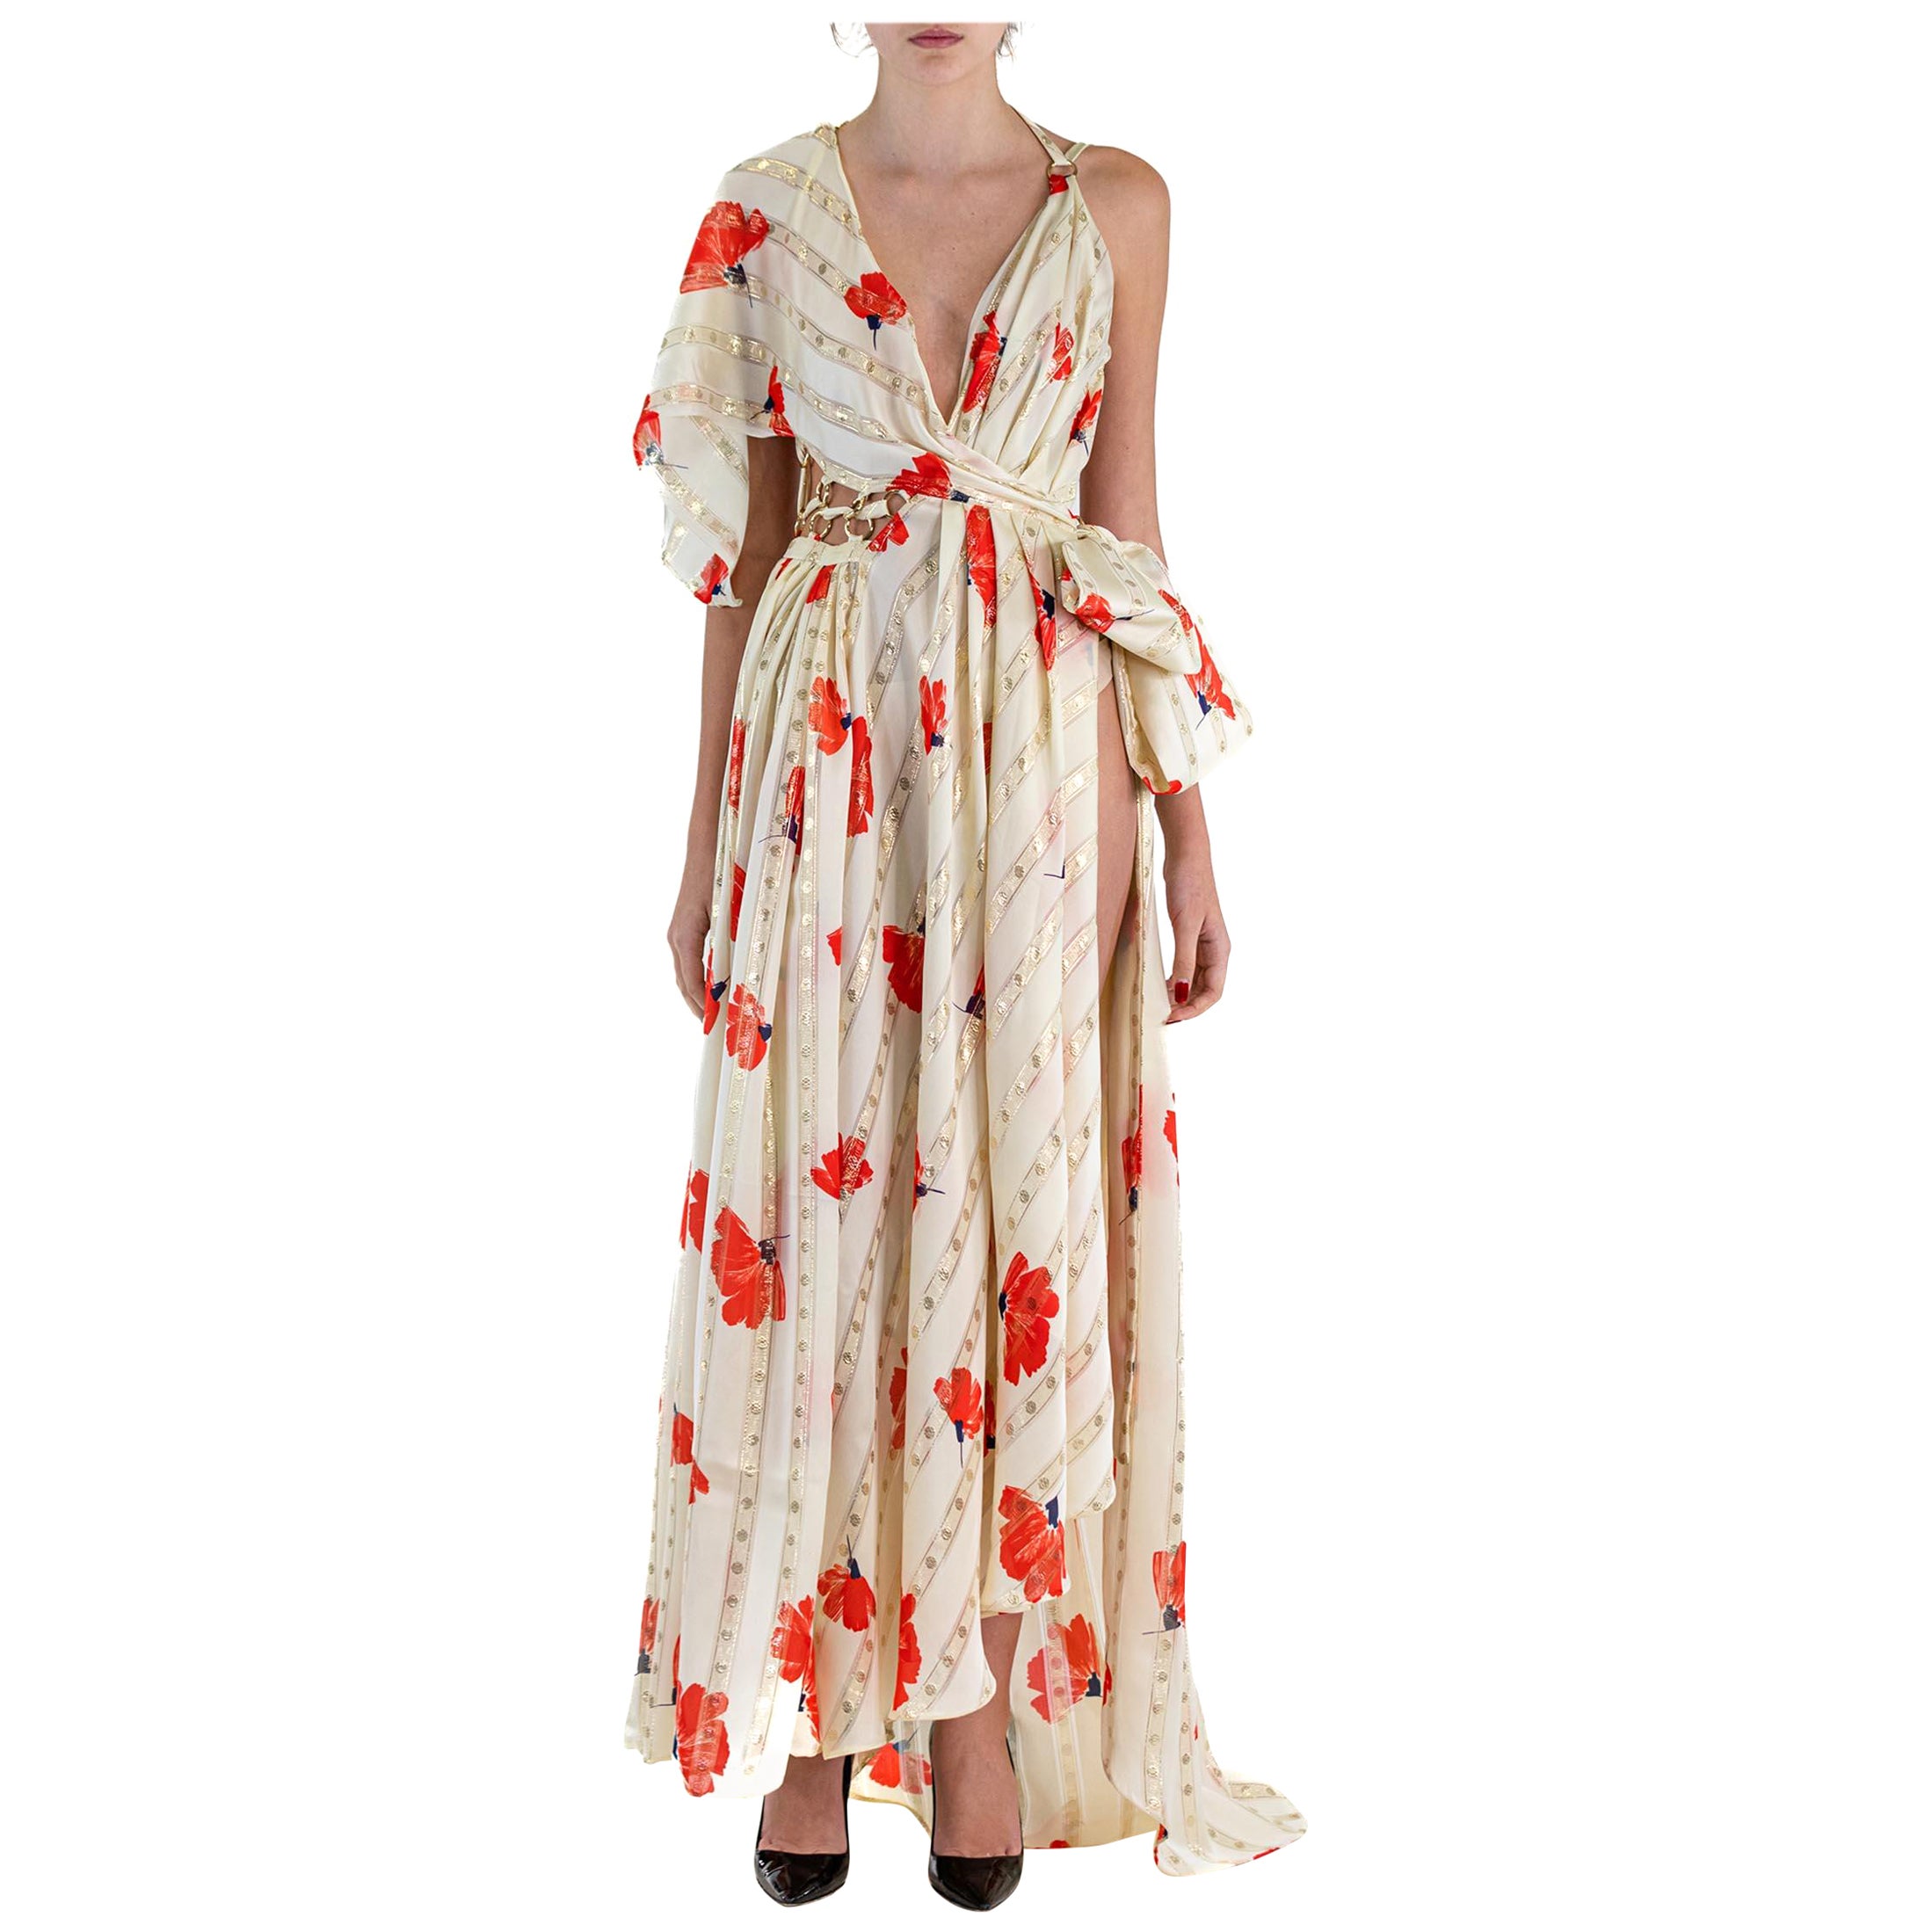 MORPHEW ATELIER Cream & Red Poly/Lurex Lamé Cut-Out Gown With High Slit Bow For Sale